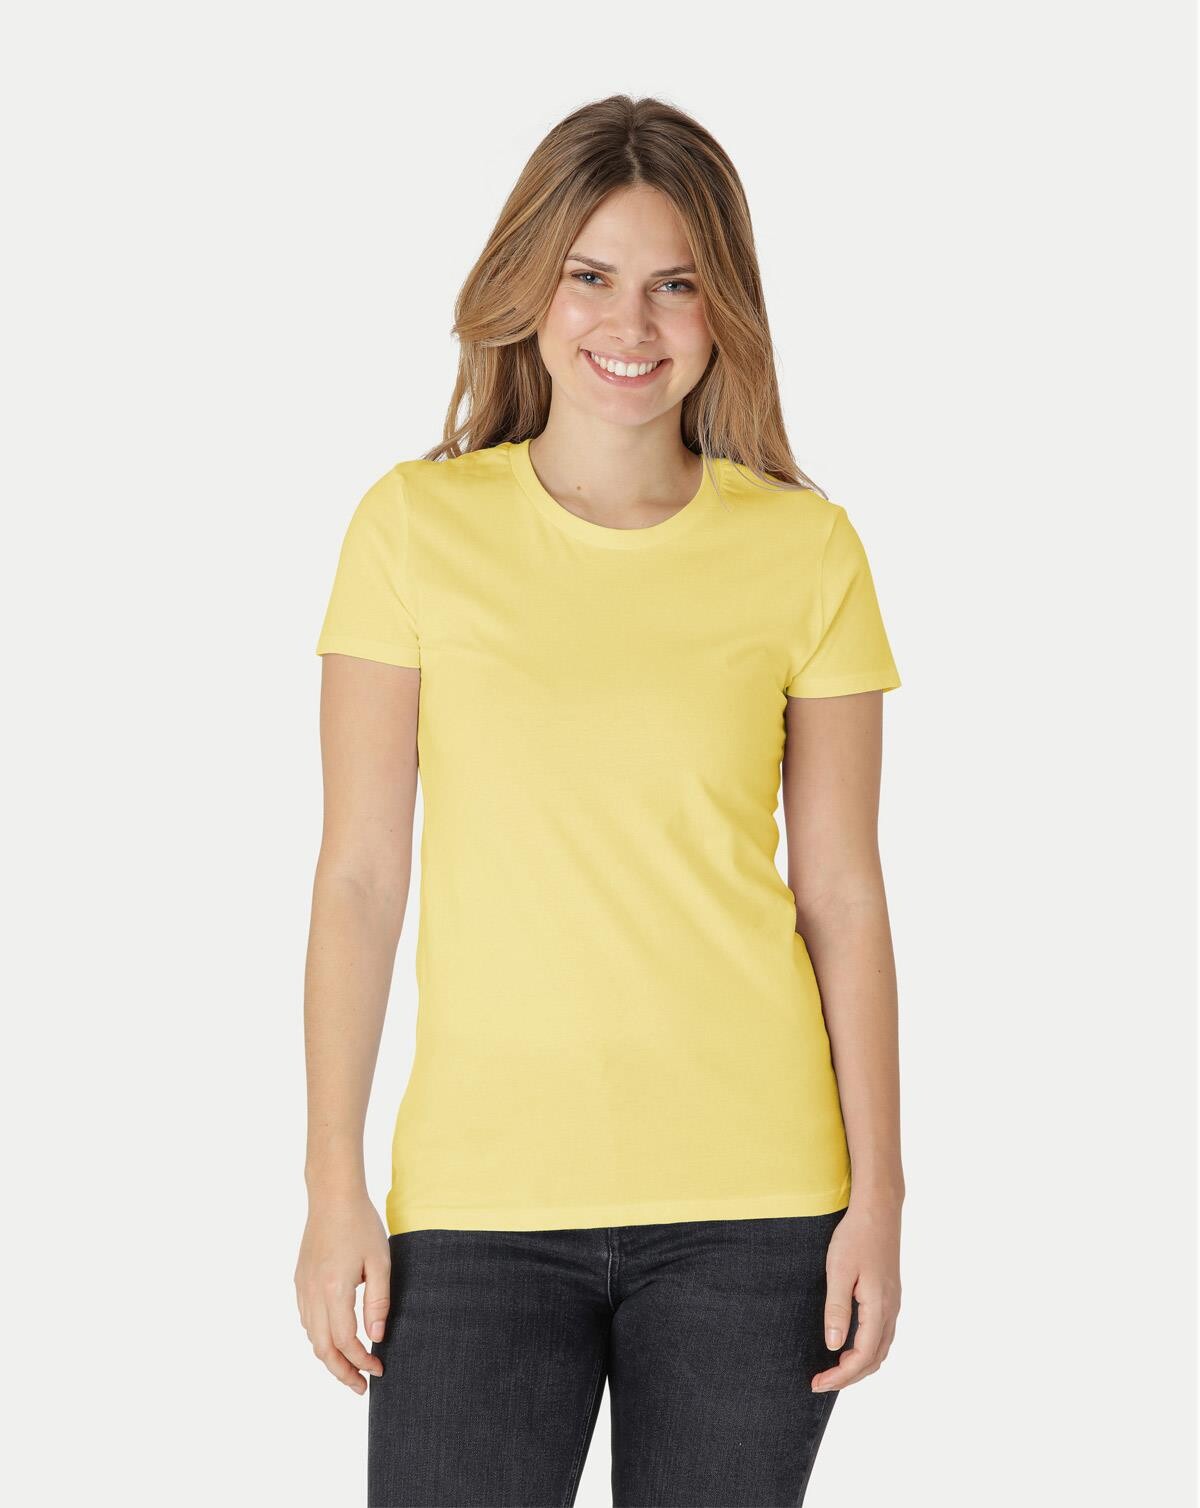 Billede af Neutral Organic - Ladies Fitted T-shirt (Safety Yellow, S)